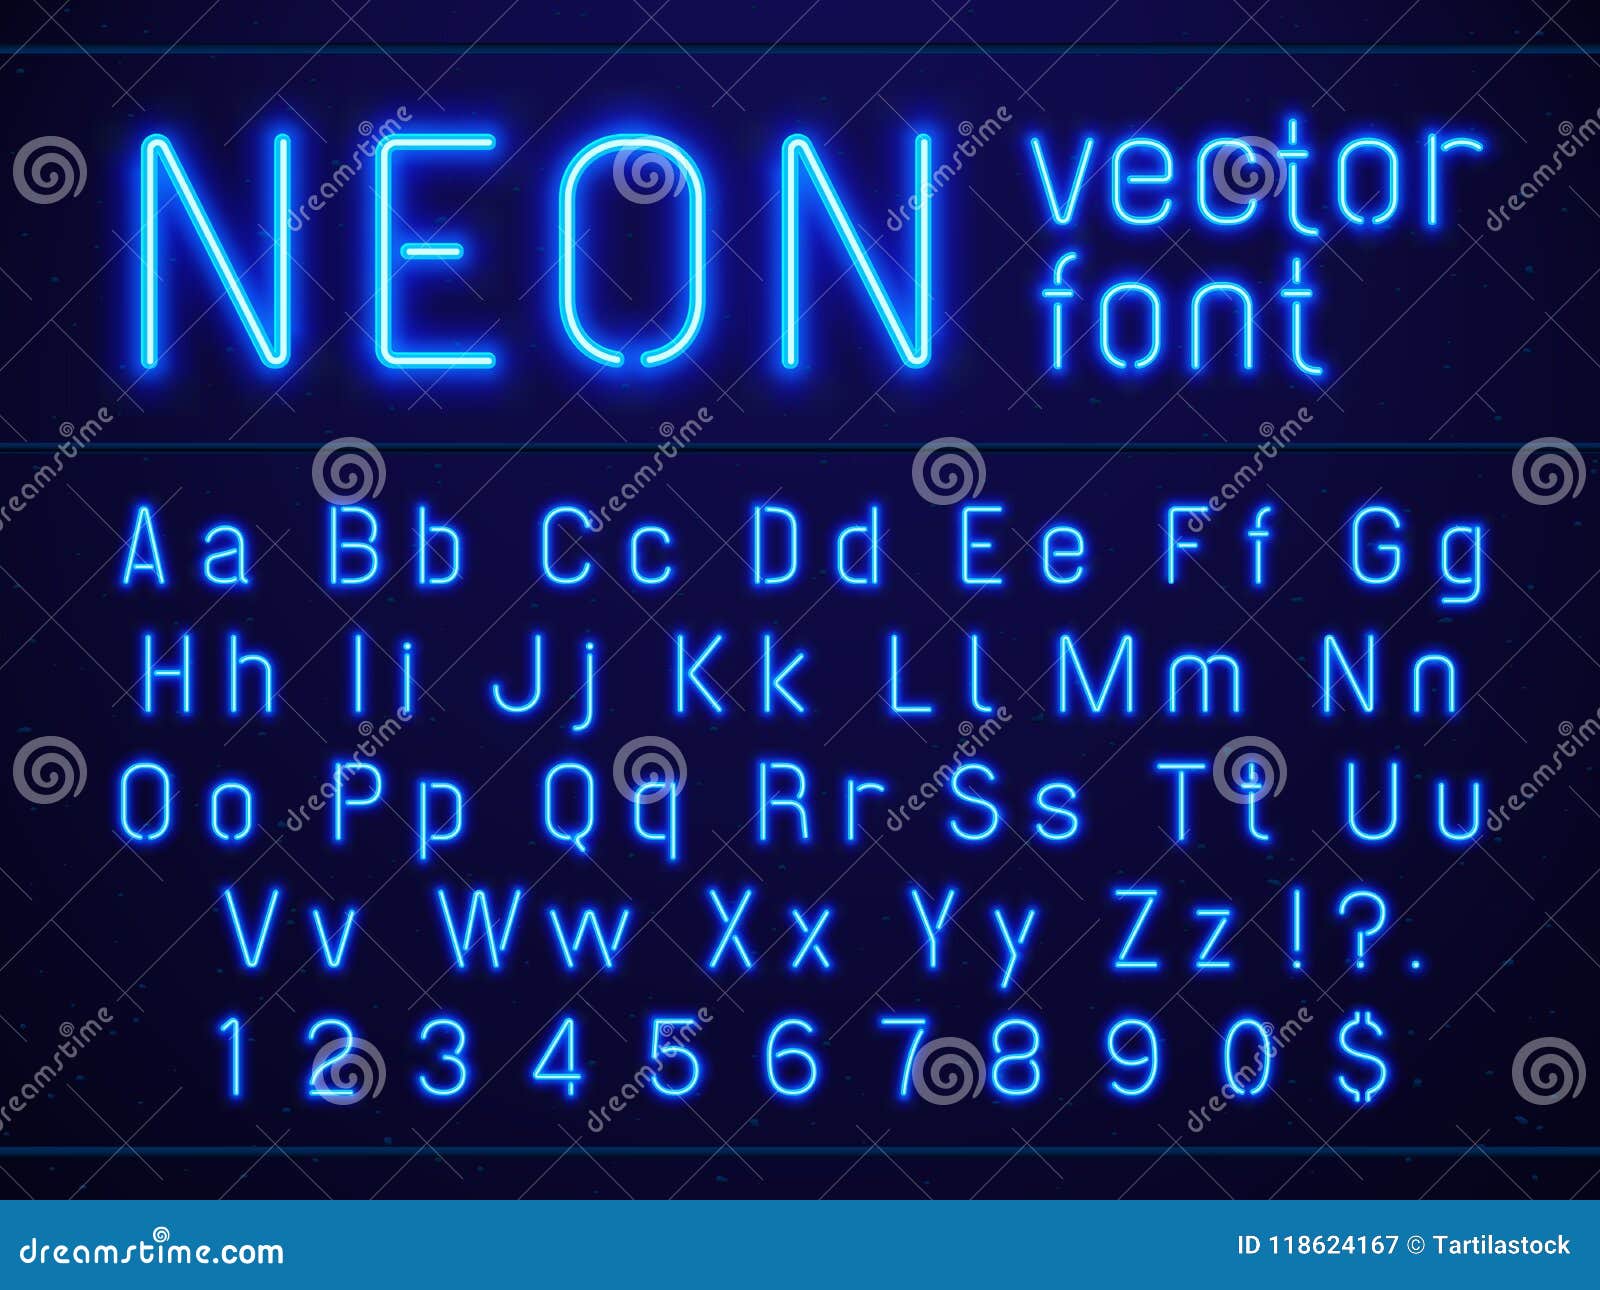 bright glowing blue neon alphabet letters and numbers font. nightlife entertainments, modern bars, casino illuminated